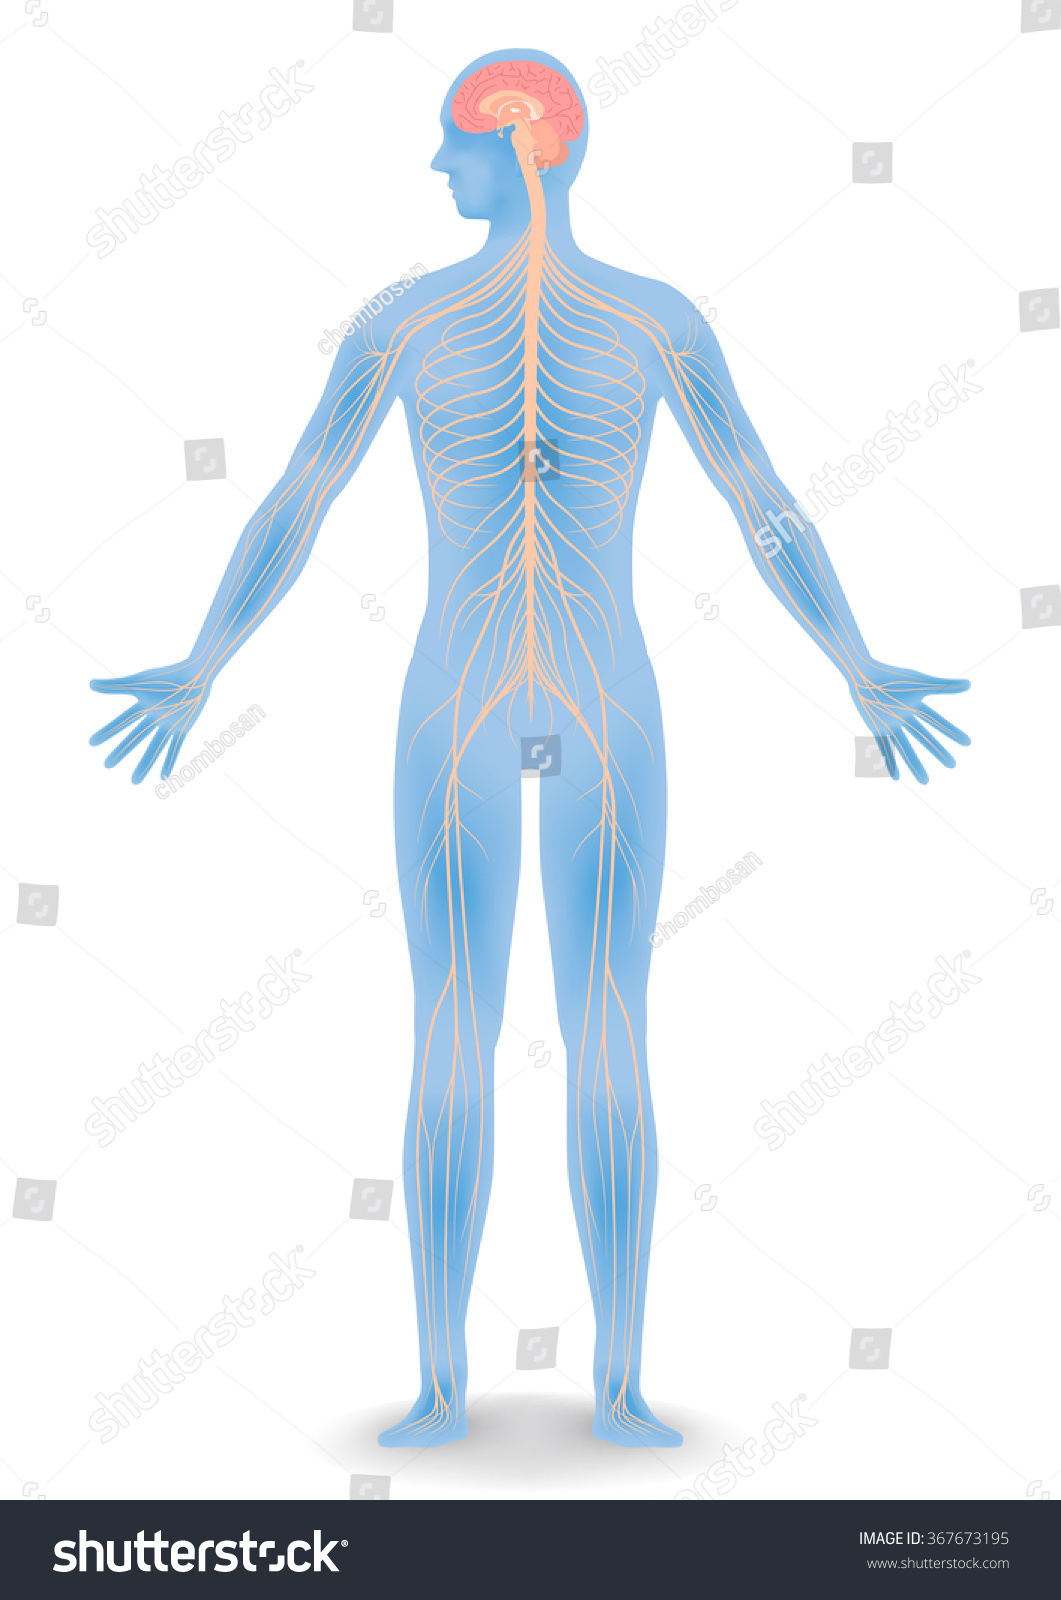 free clipart human body systems - photo #32